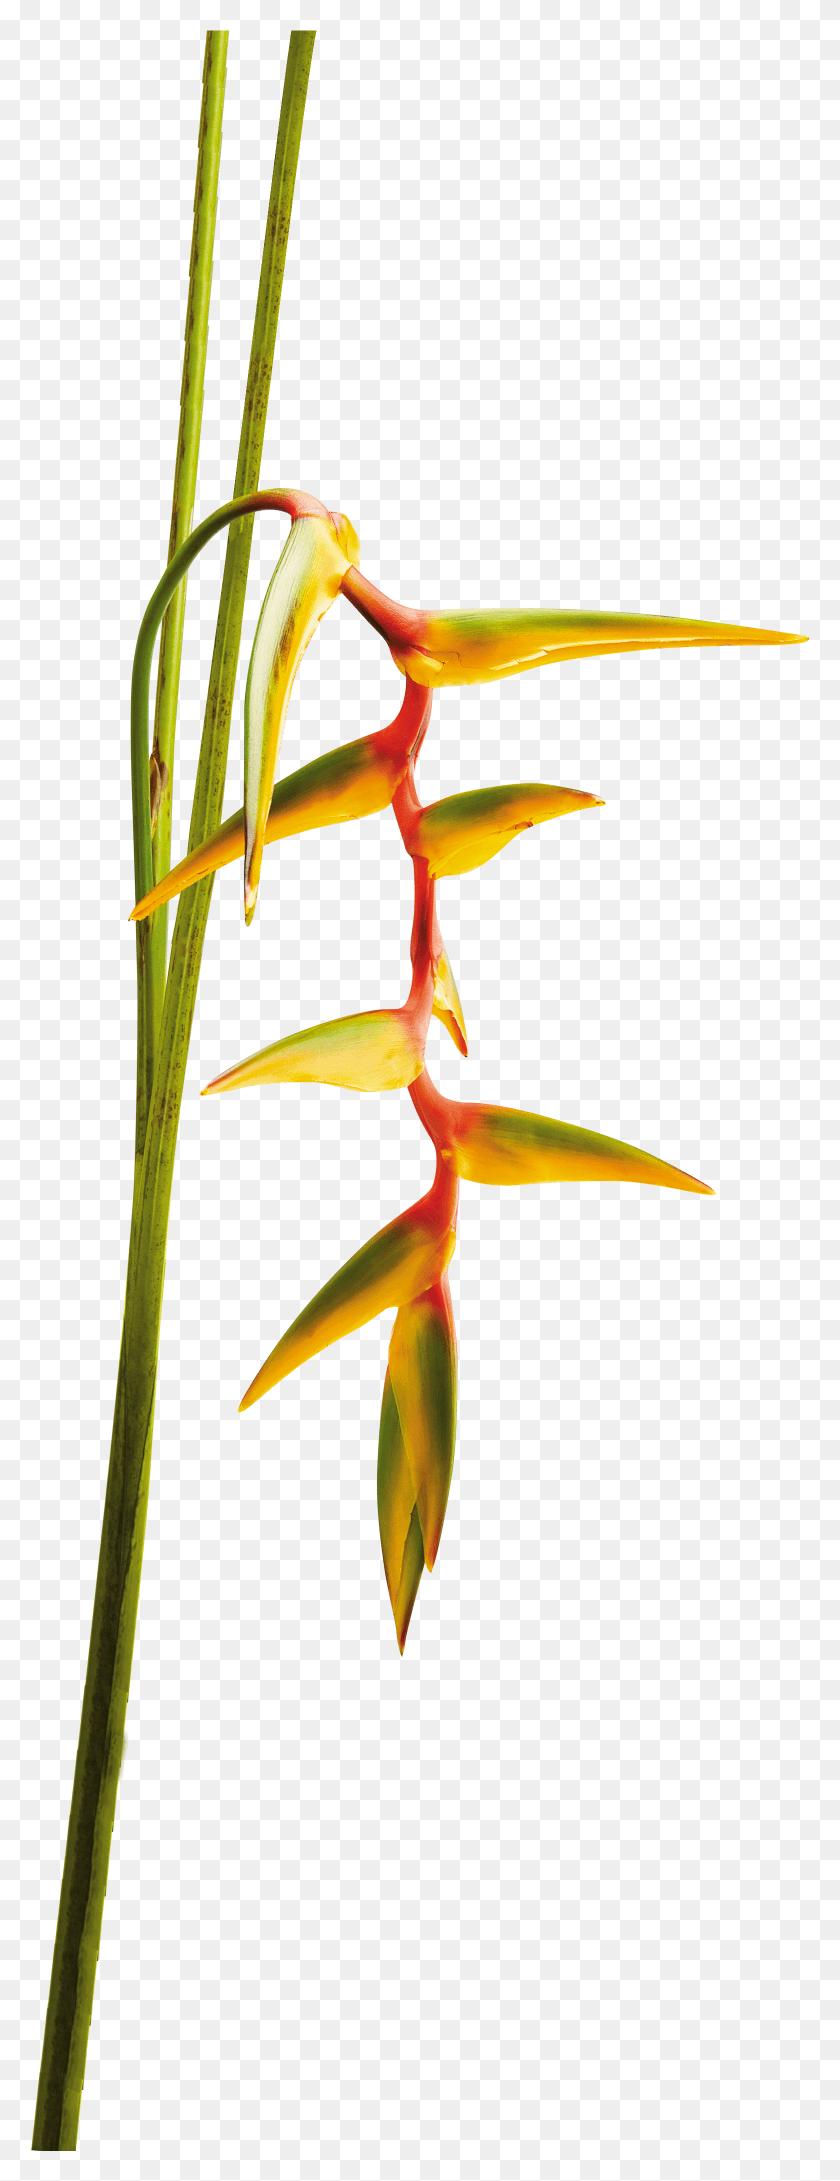 1560x4242 Descargar Png Heliconia Angry Moon Heliconia, Planta, Flor, Flor Hd Png